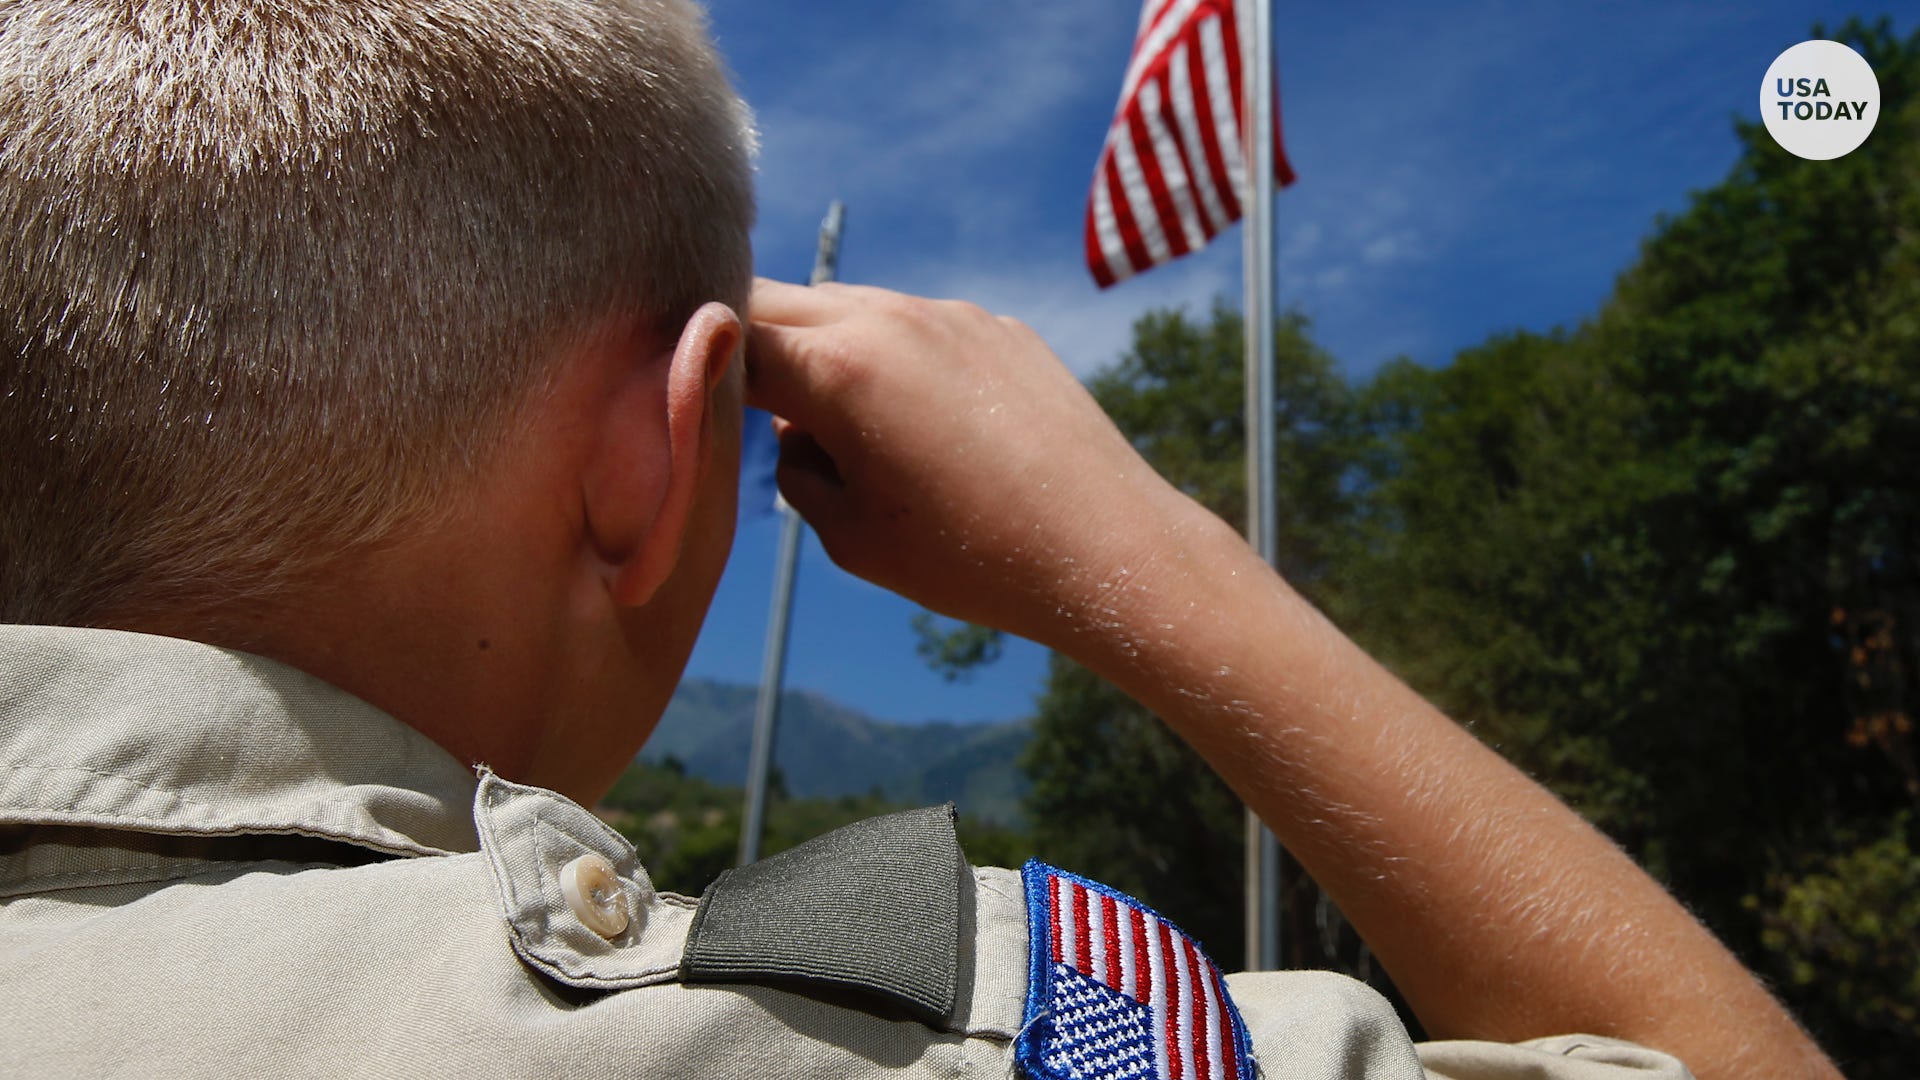 Boy Scouts sex abuse claims may grow to tens of thousands